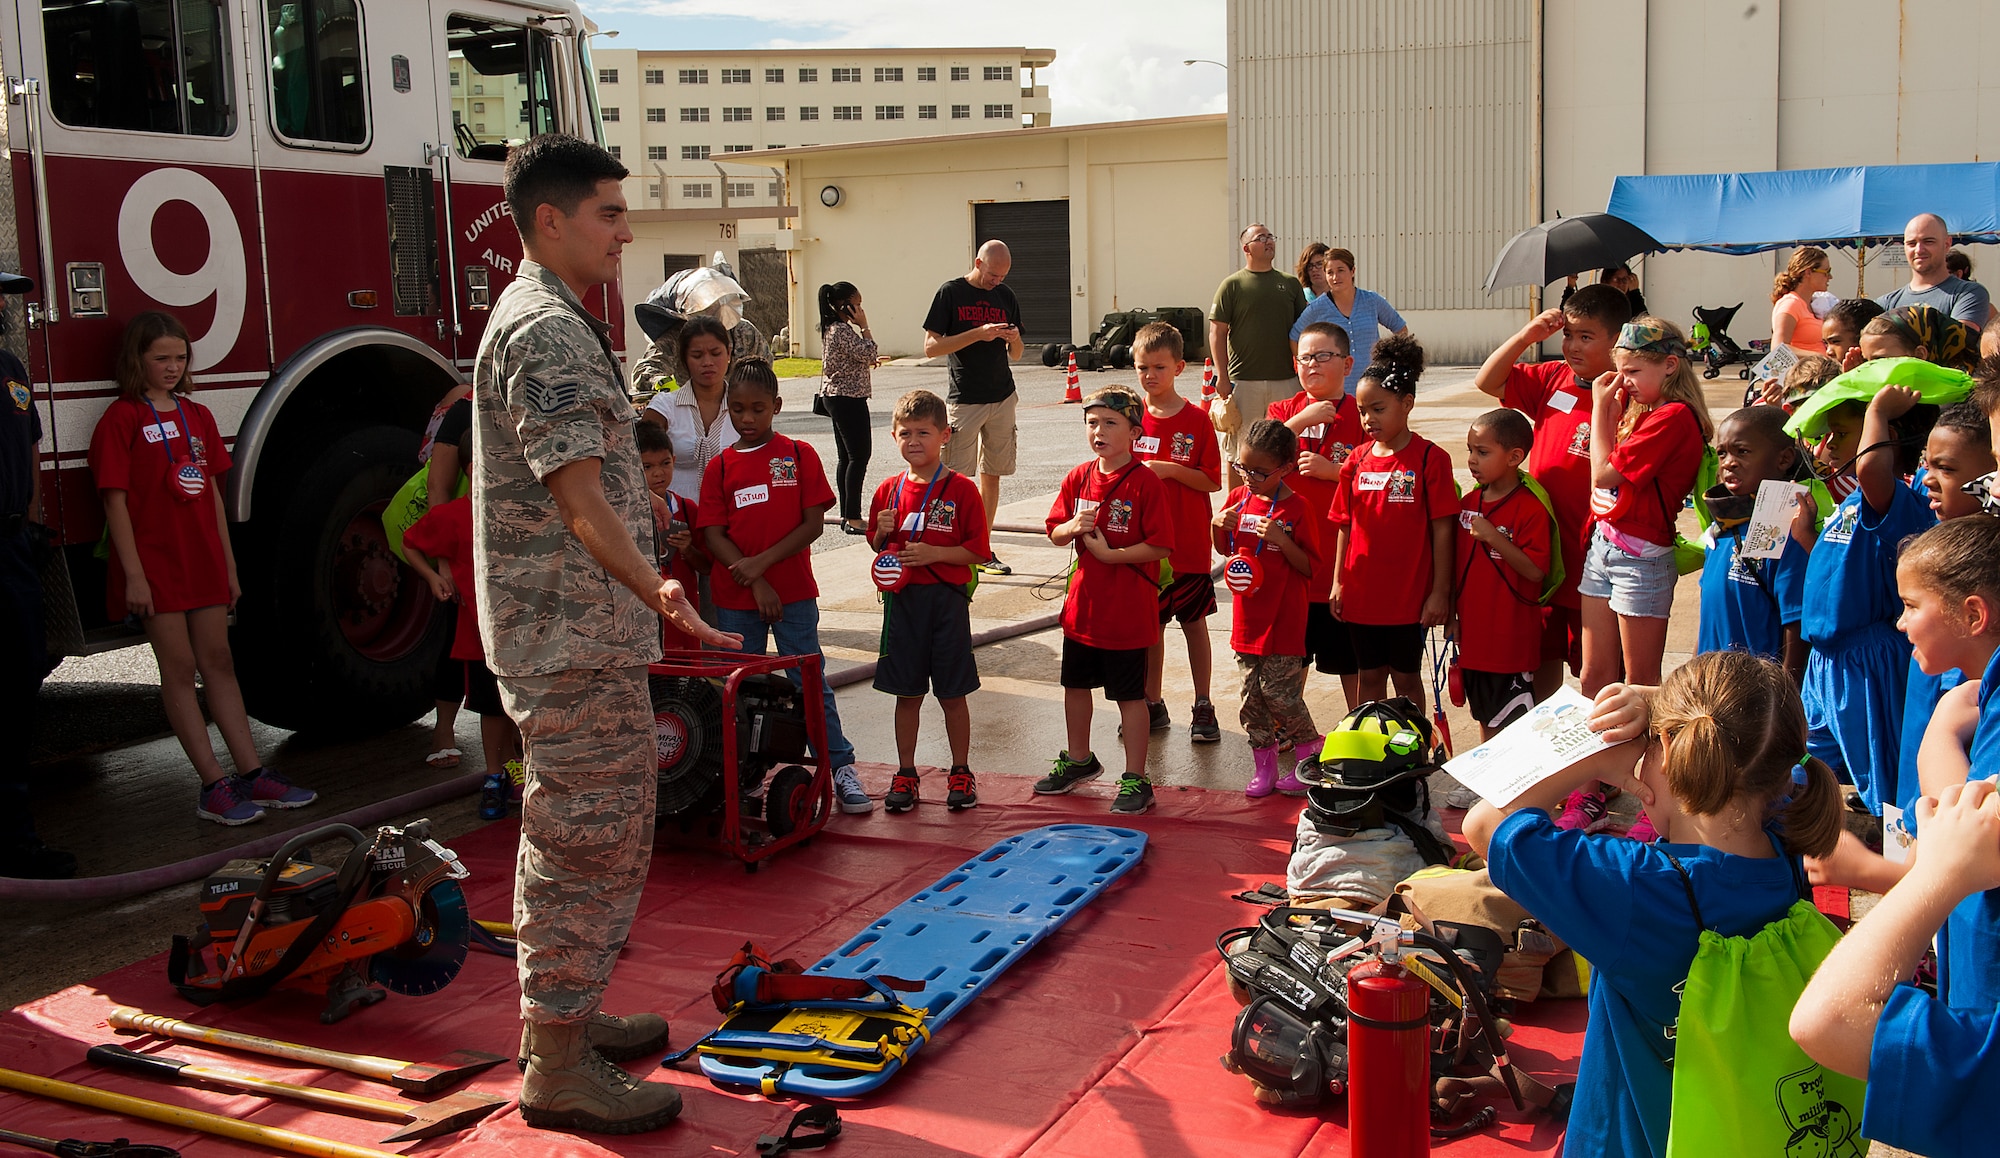 U.S. Air Force Staff Sgt. Juan Duarte, 18th Civil Engineer Squadron firefighter, teaches children about the different equipment that firefighters use on the job at Skoshi Warrior Nov. 14, 2015, at Kadena Air Base, Japan. This event helps military children understand what their parents go through while deploying and day-to-day operations by giving them a hands-on experience at some of the tasks military members go through. (U.S. Air Force photo by Airman 1st Class Corey M. Pettis)